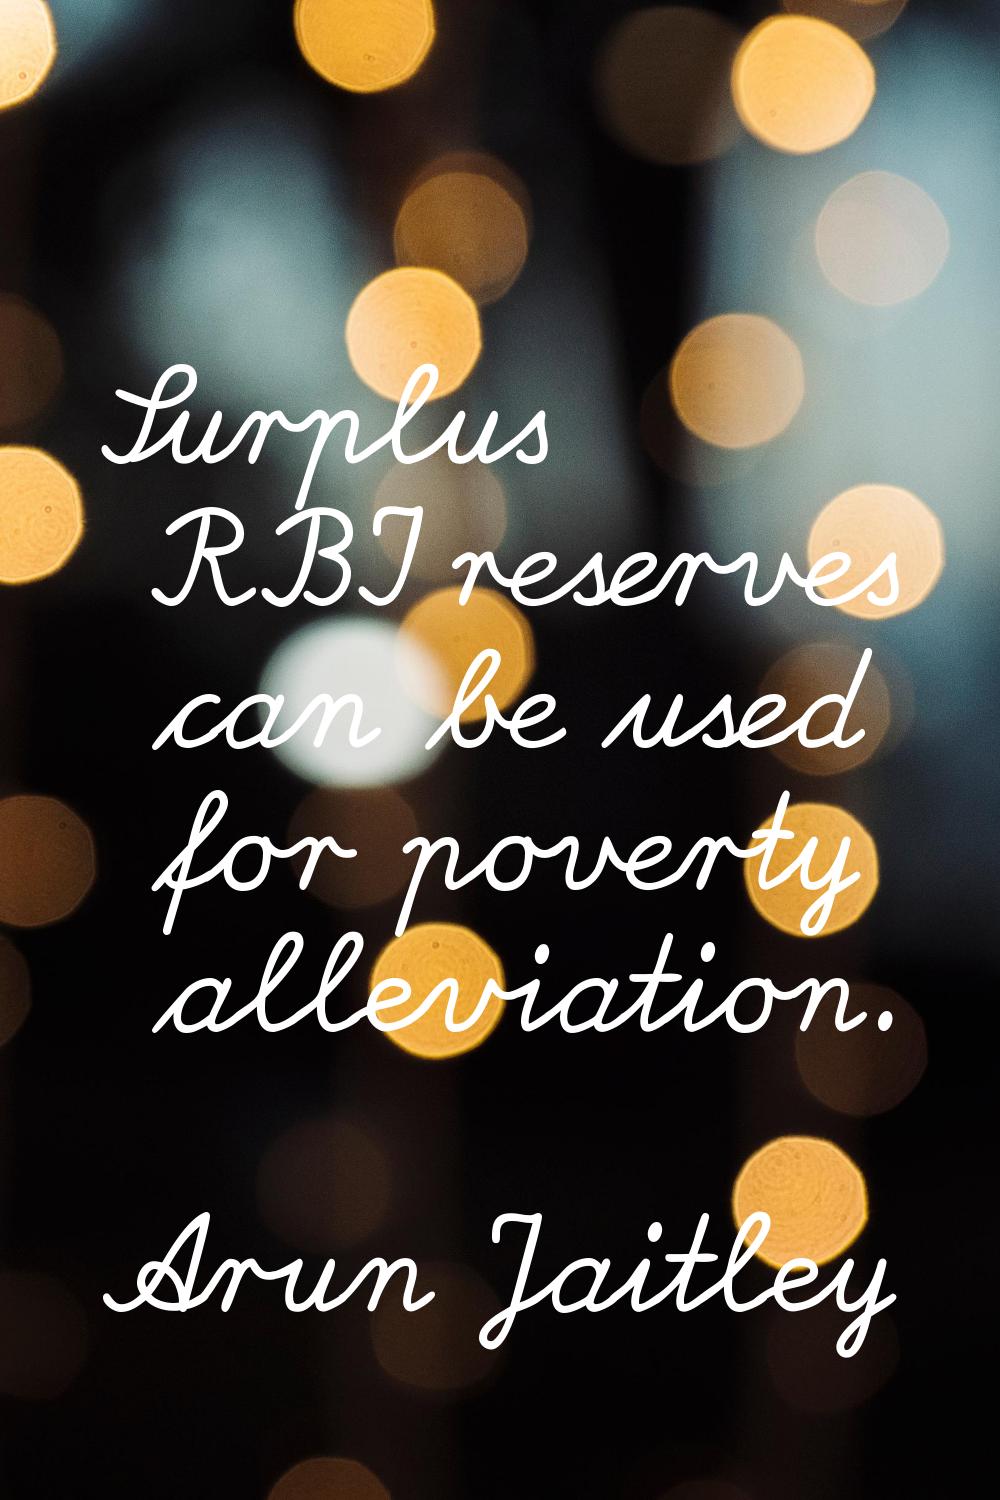 Surplus RBI reserves can be used for poverty alleviation.